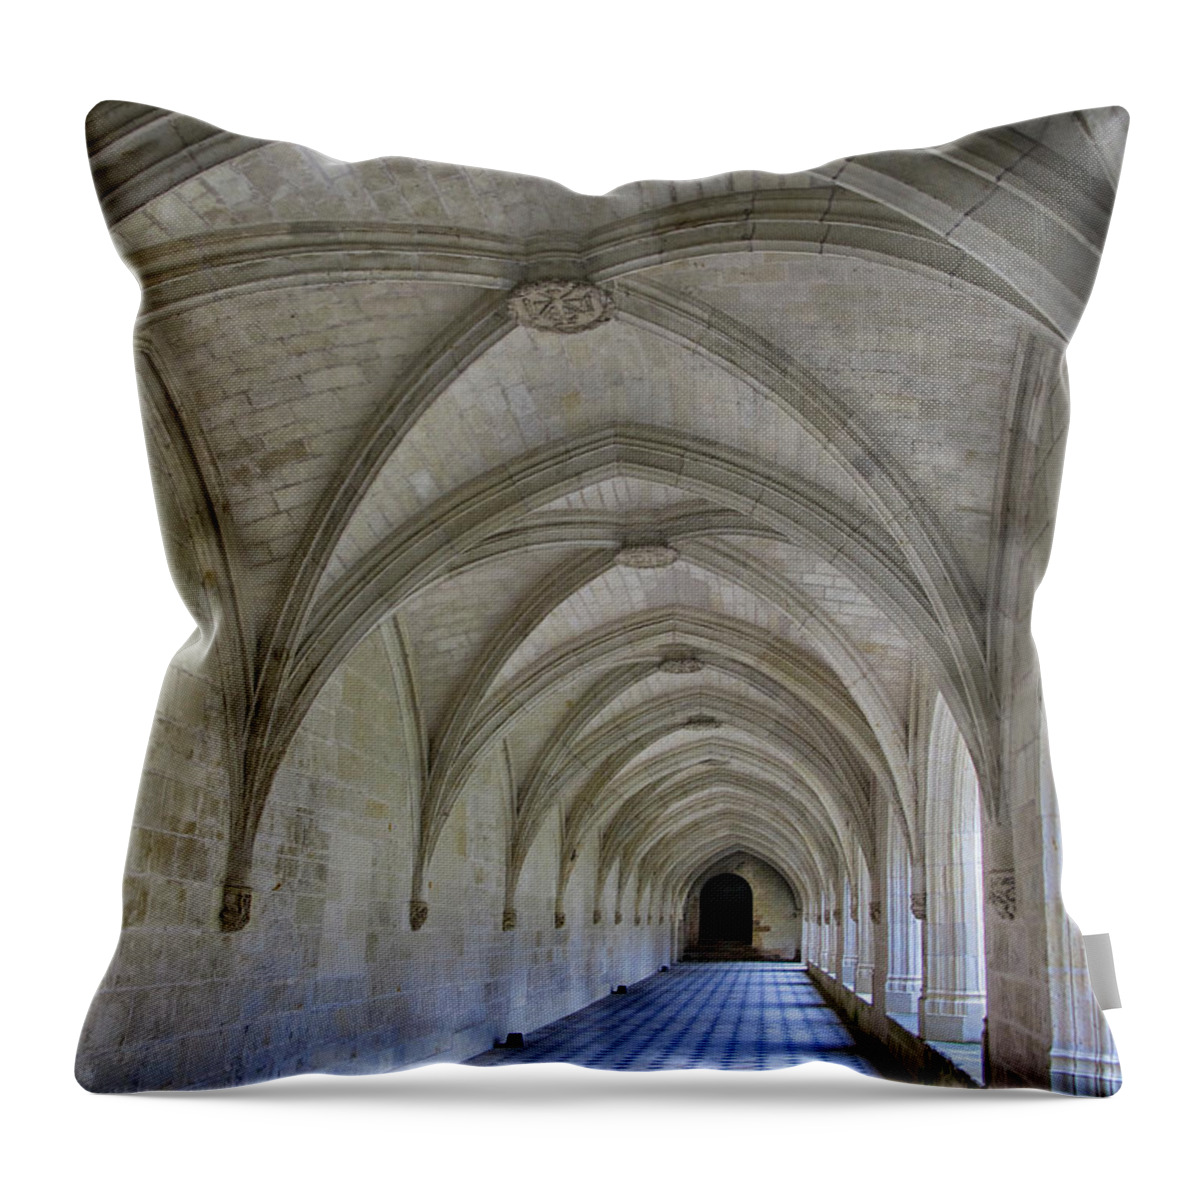 Cloister Throw Pillow featuring the photograph A Cloister Gallery by Dave Mills